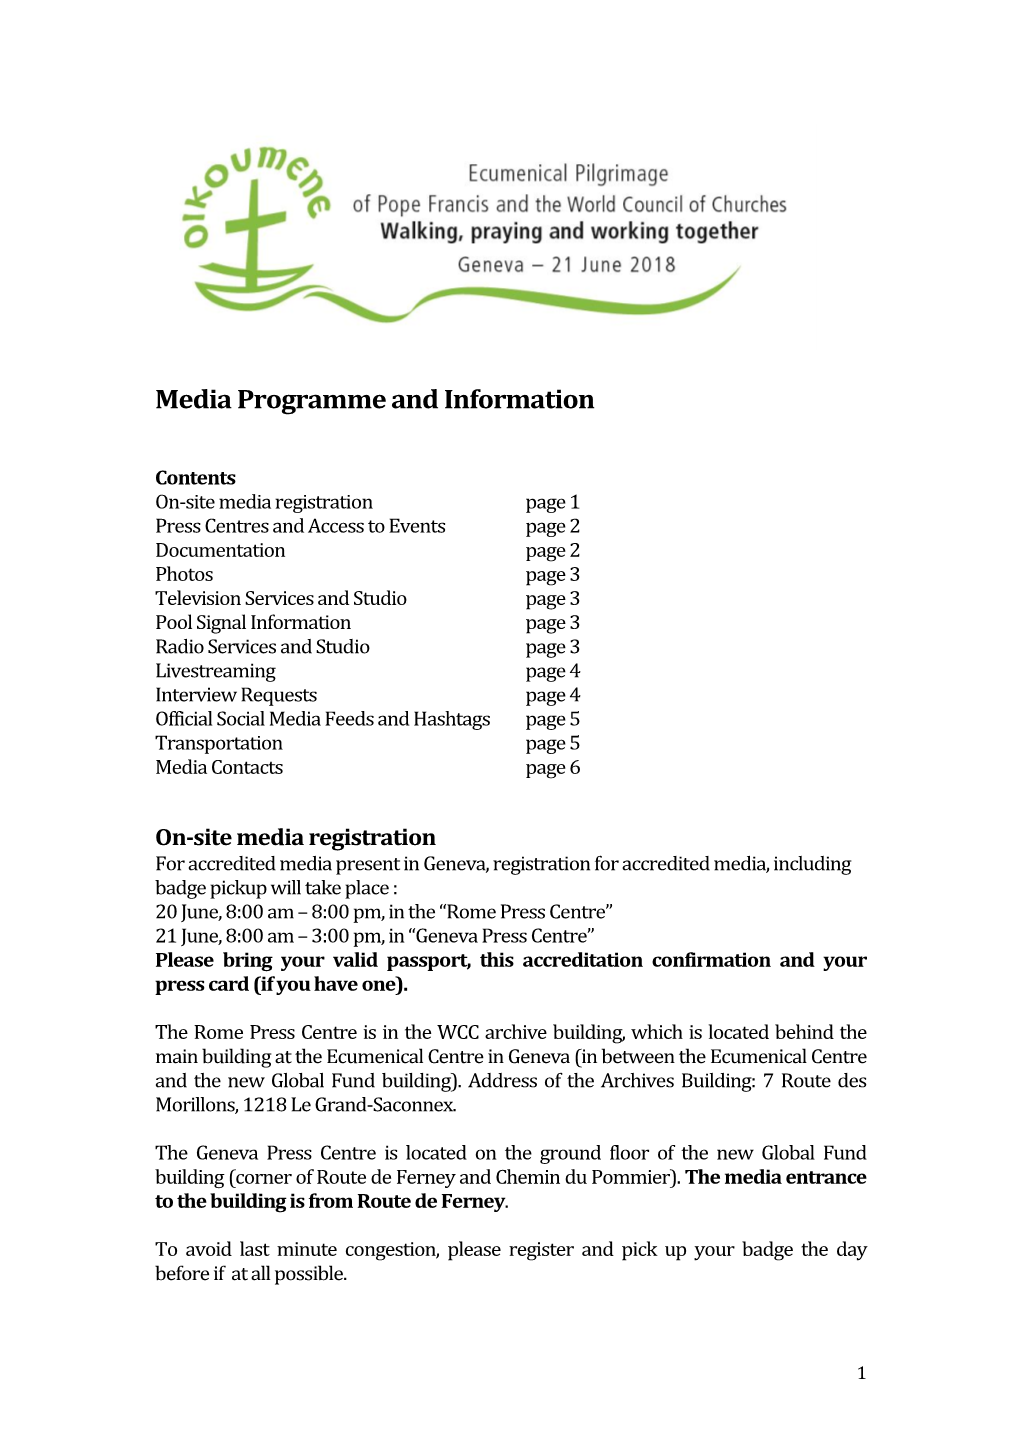 Media Programme and Information